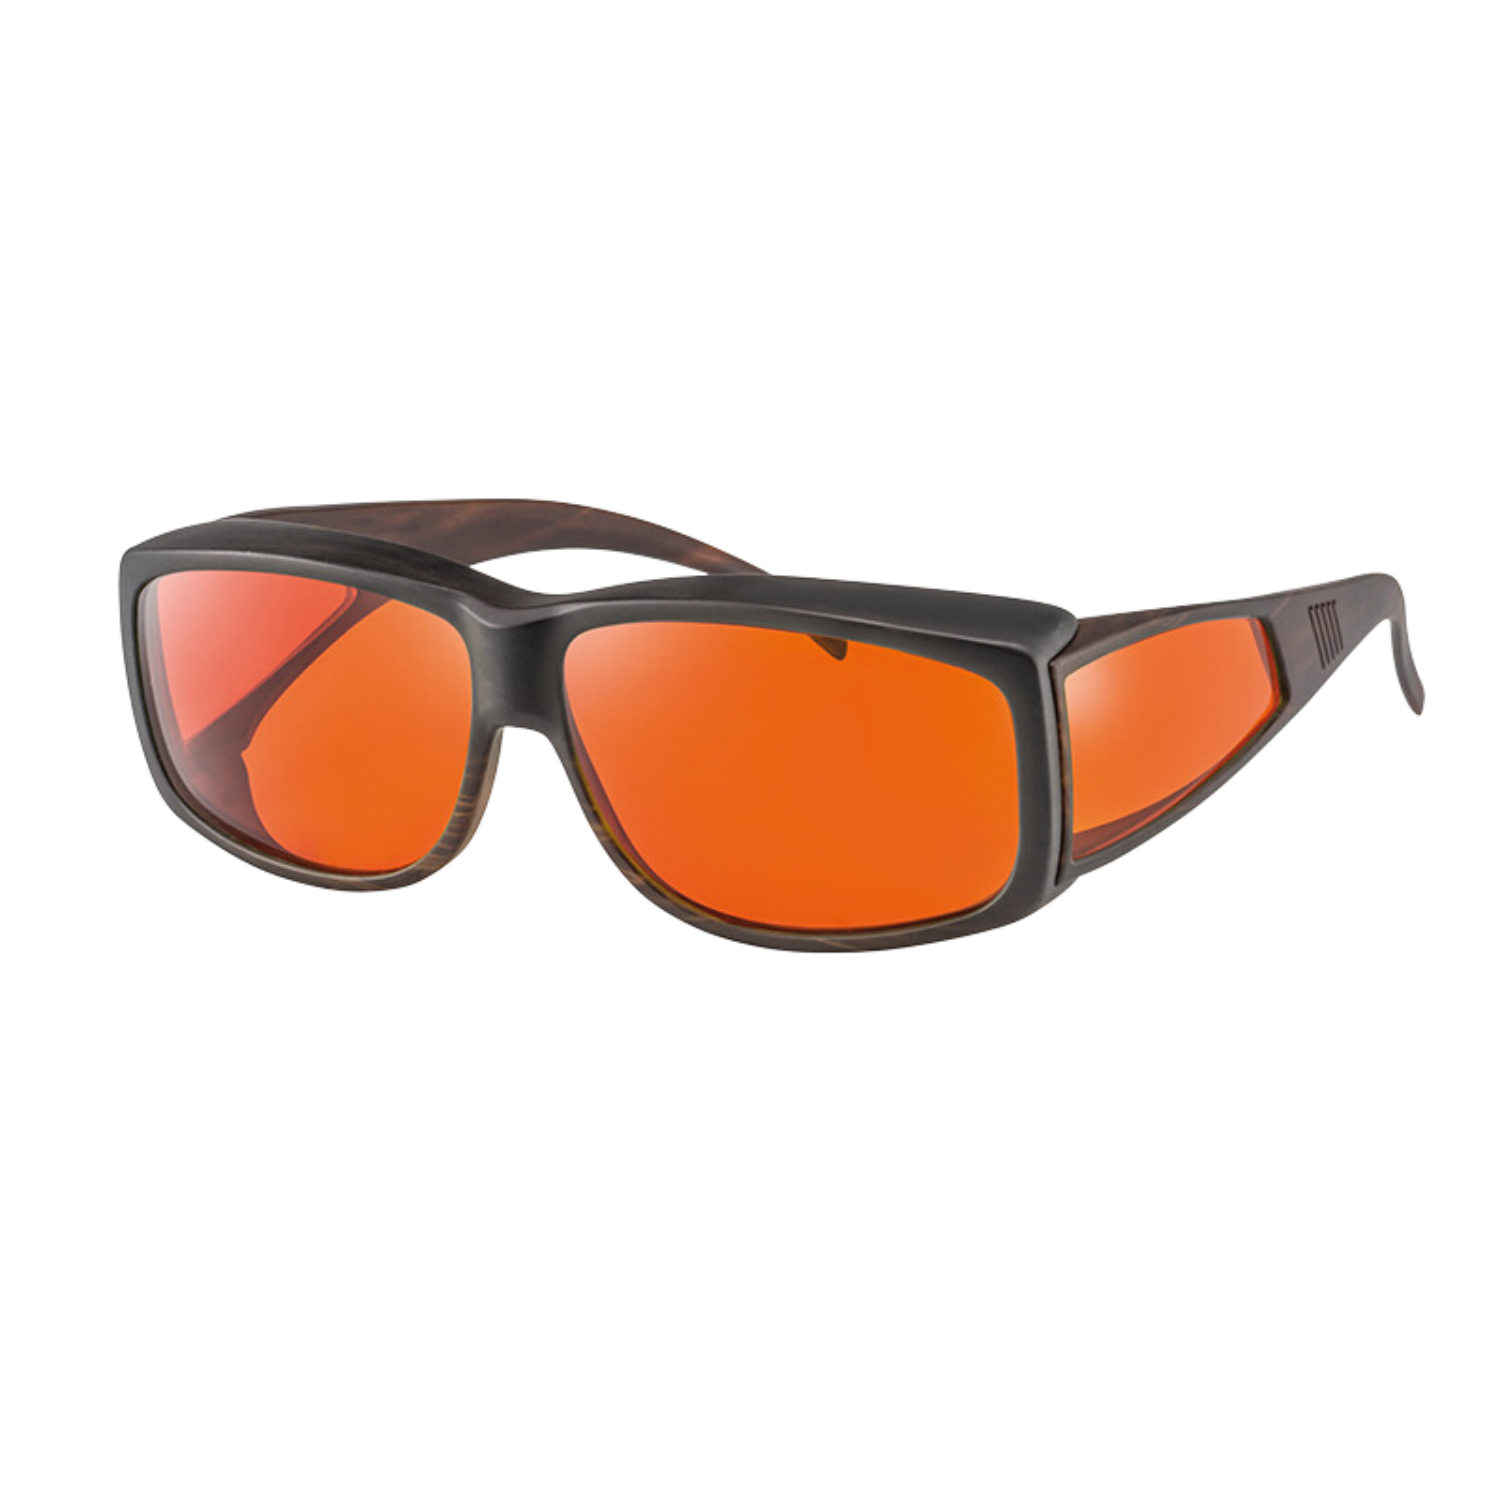 Image of the Eschenbach Asensys XL Blue Light Blocking Glasses with Red Tint.